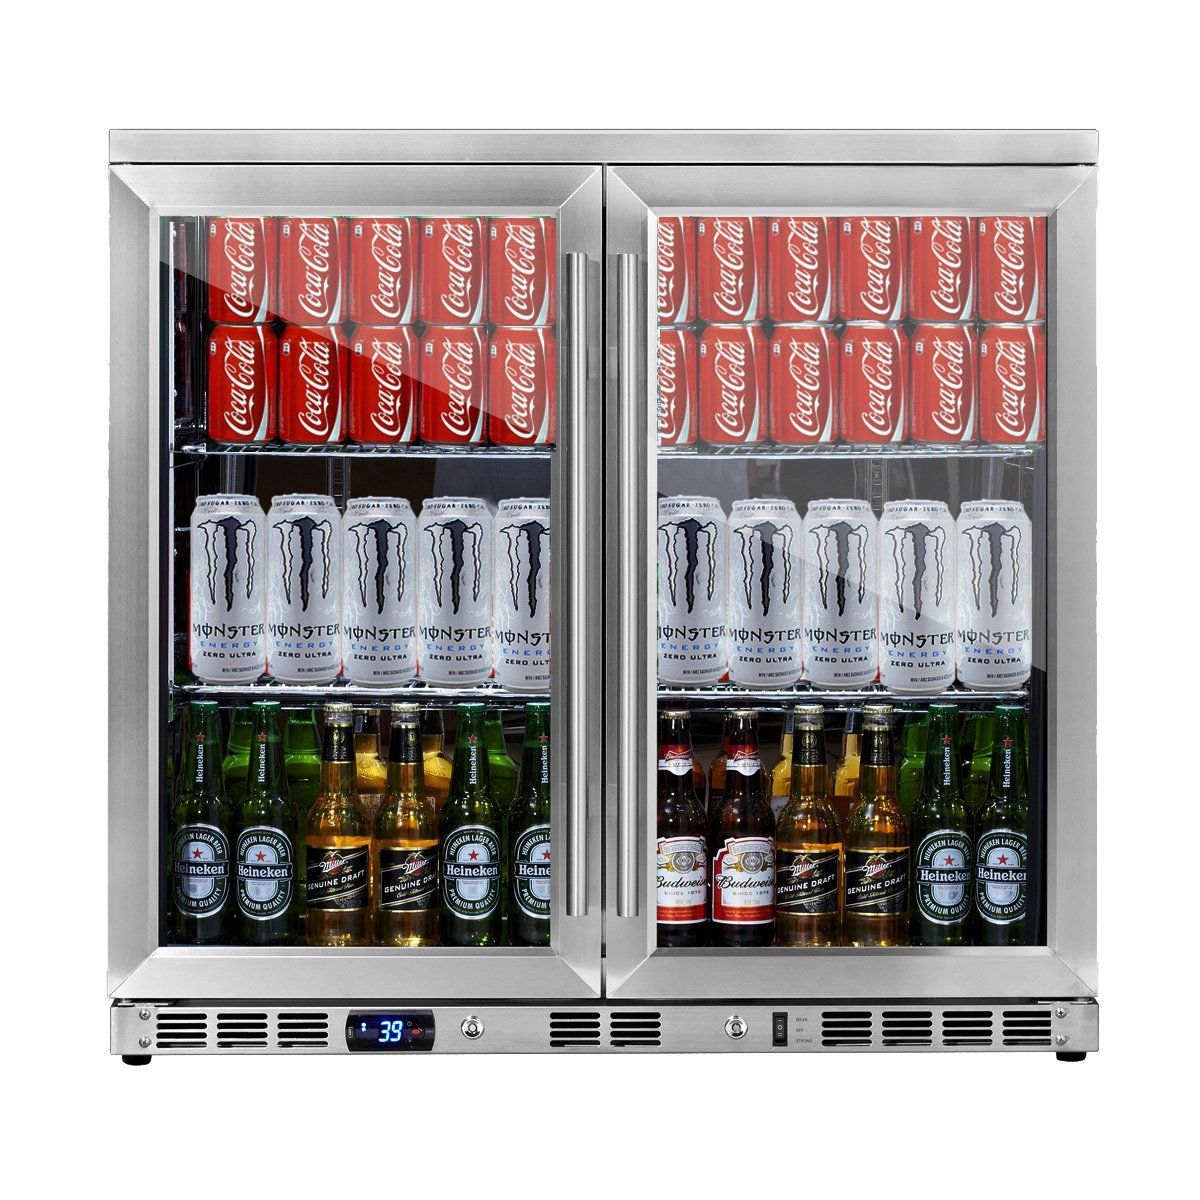 Kingsbottle - 36" Built-in Beverage Center in Stainless Steel with Heated Low-E Glass French Door (KBU56M) Beverage Center KingsBottle 2-Year Warranty (Free) 